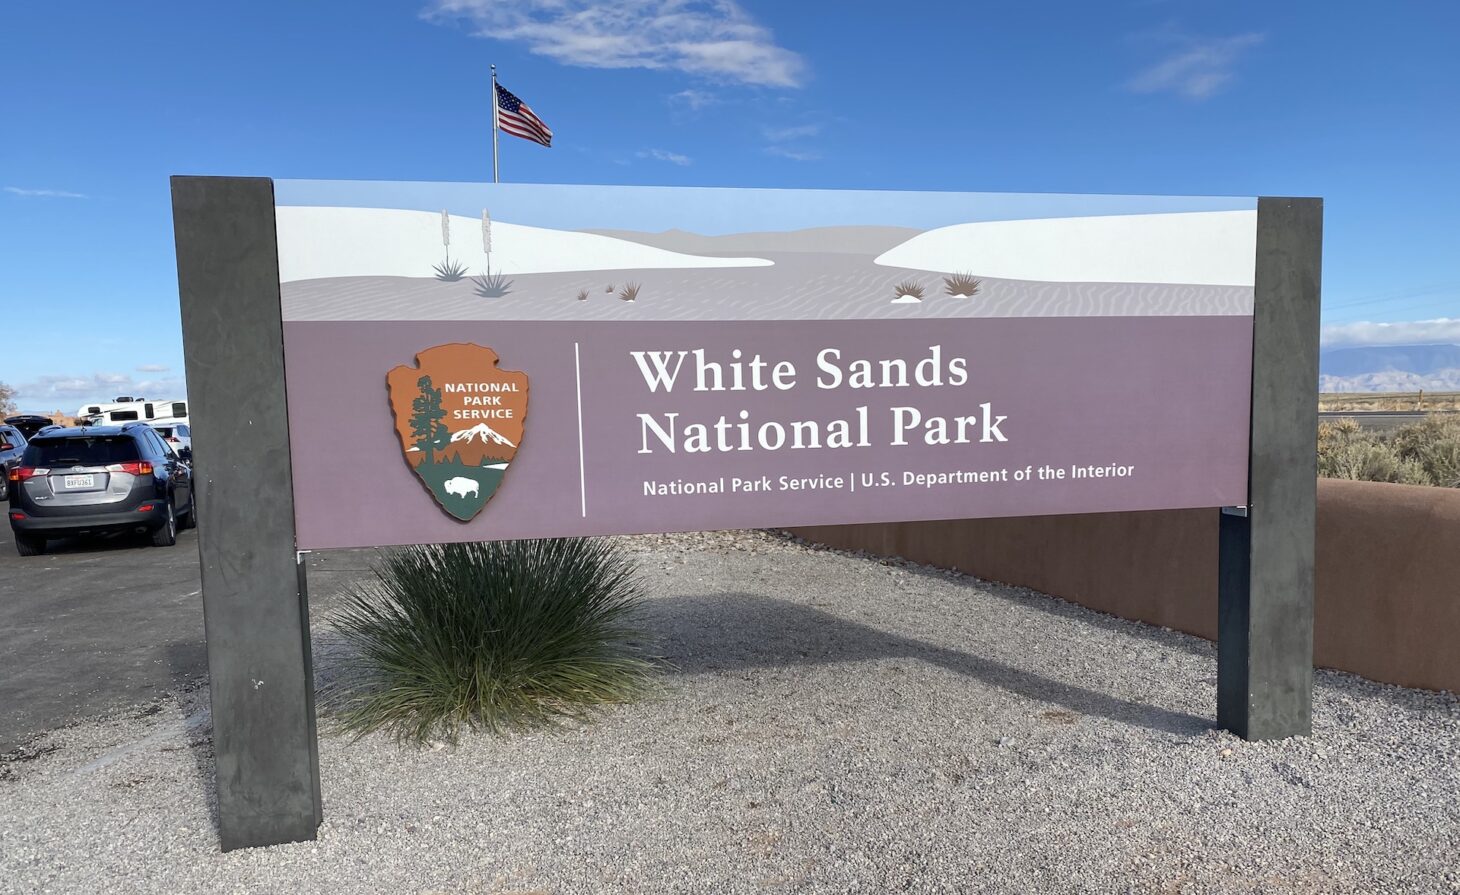 Entrance sign to national park that reads "White Sands National Park"